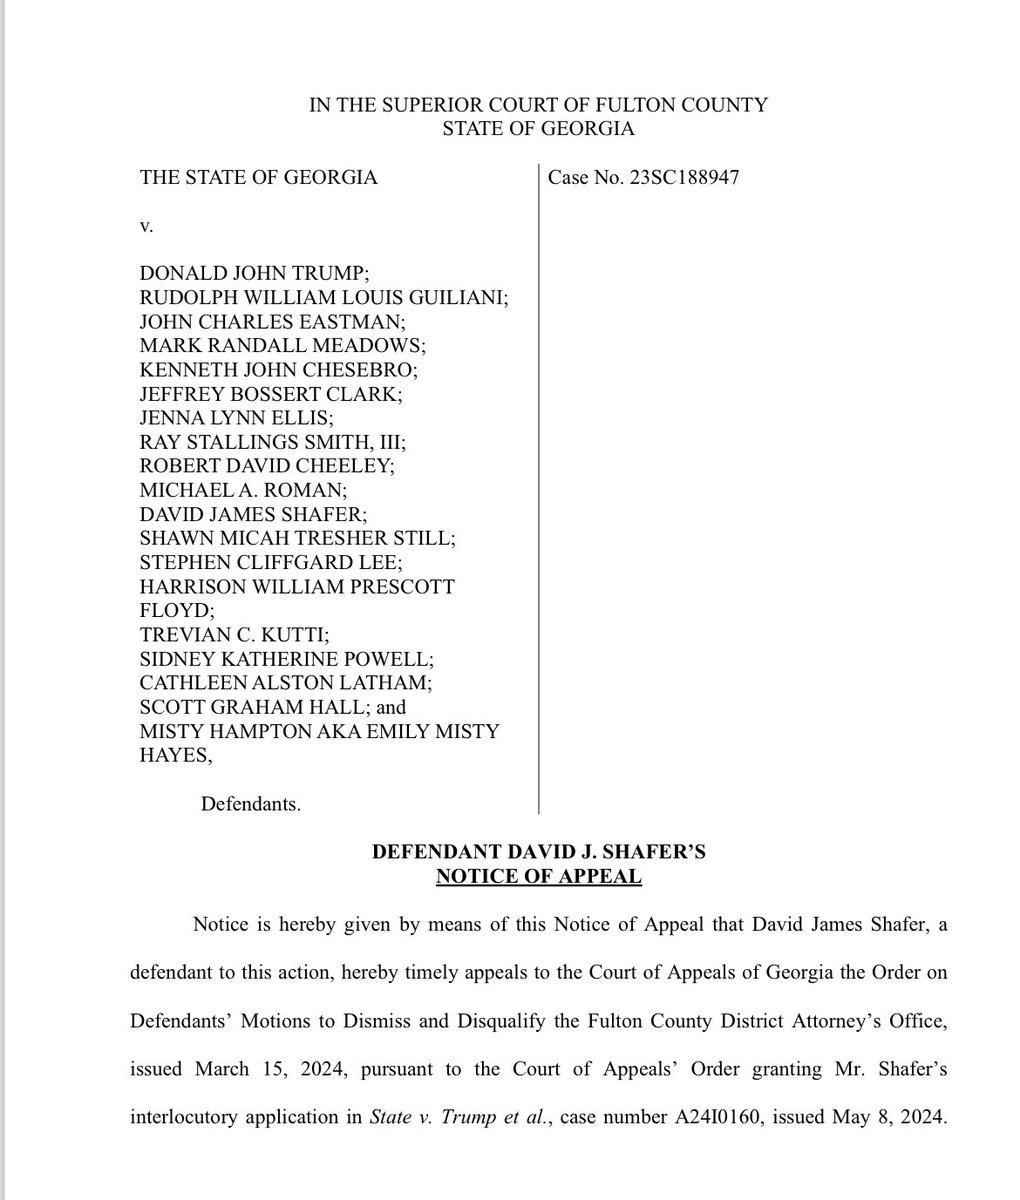 Two days ago, the Georgia Court of Appeals granted our application for an appeal and agreed to hear our motion to disqualify Fani Willis. Today we took the next step and filed this notice of appeal.